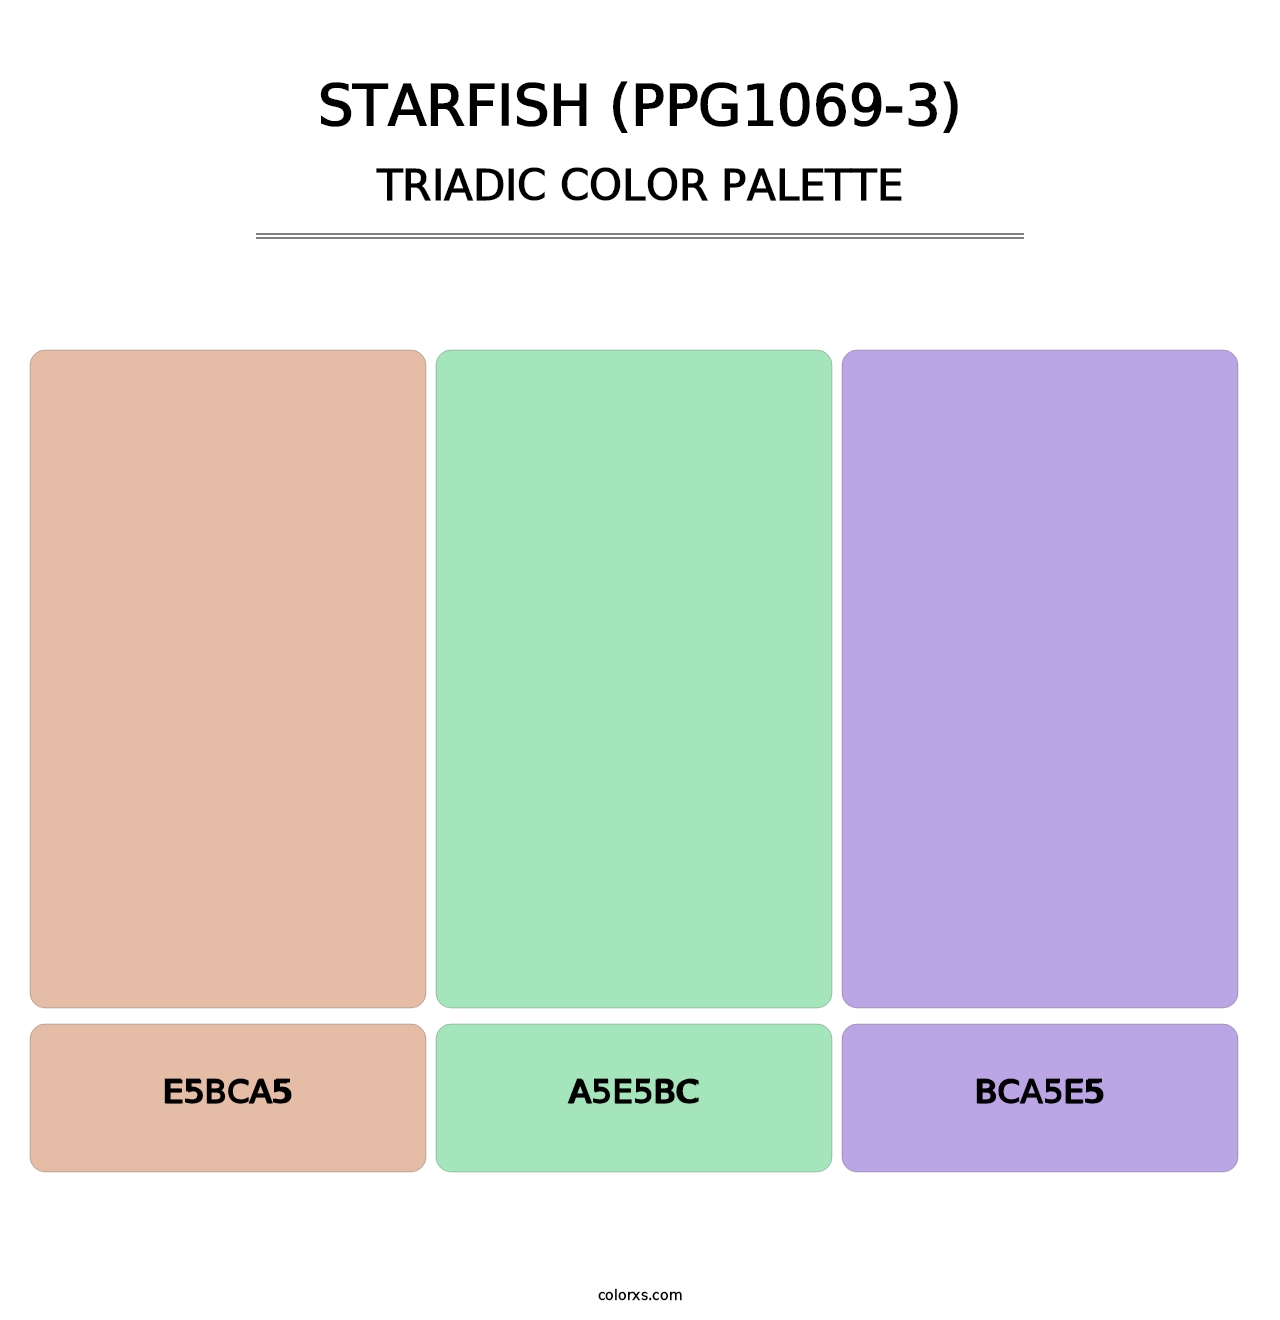 Starfish (PPG1069-3) - Triadic Color Palette